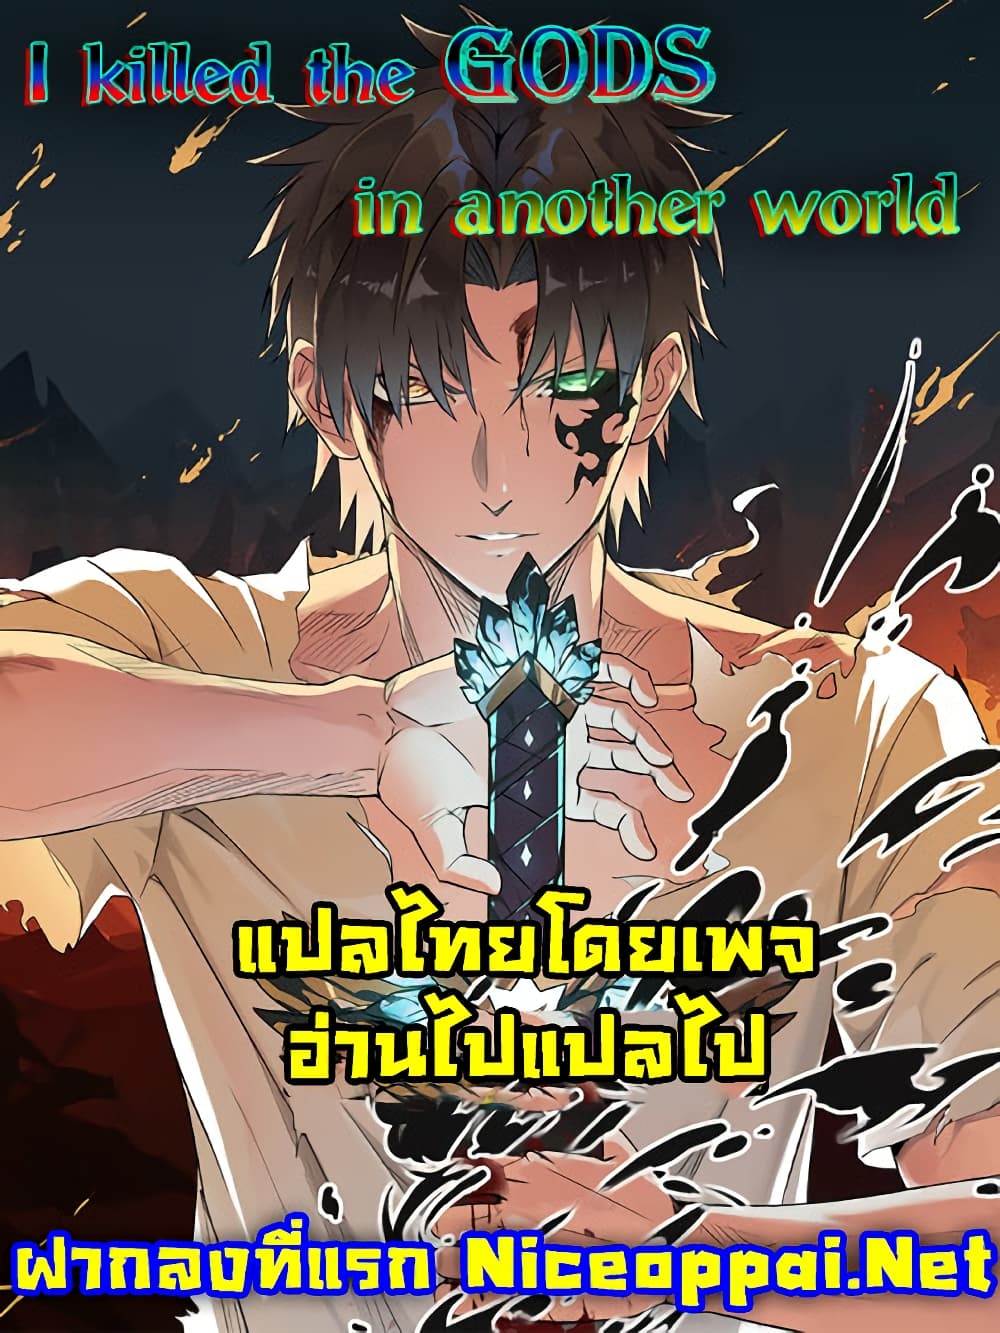 I Killed The Gods in Another World 9 (1)